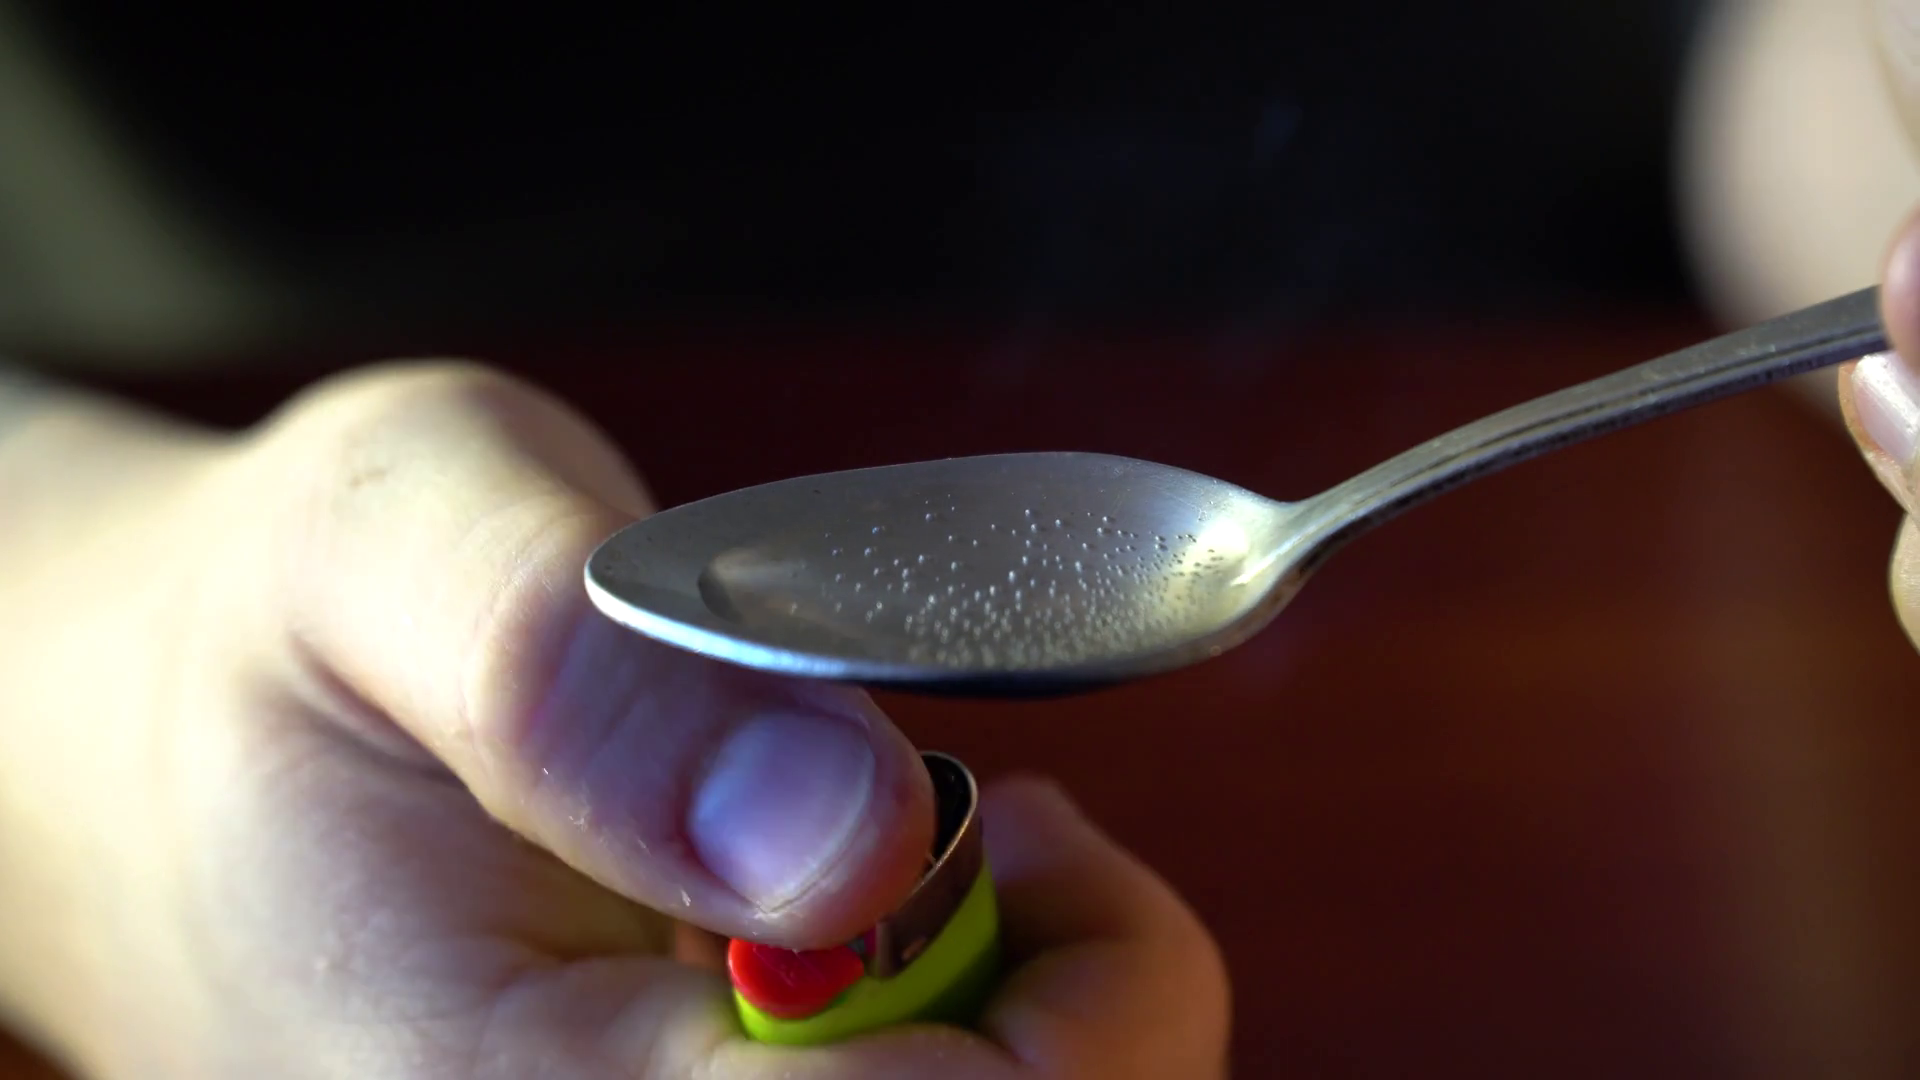 Man Preparing Dose Of cocaine by heating it with lighter in spoon ...